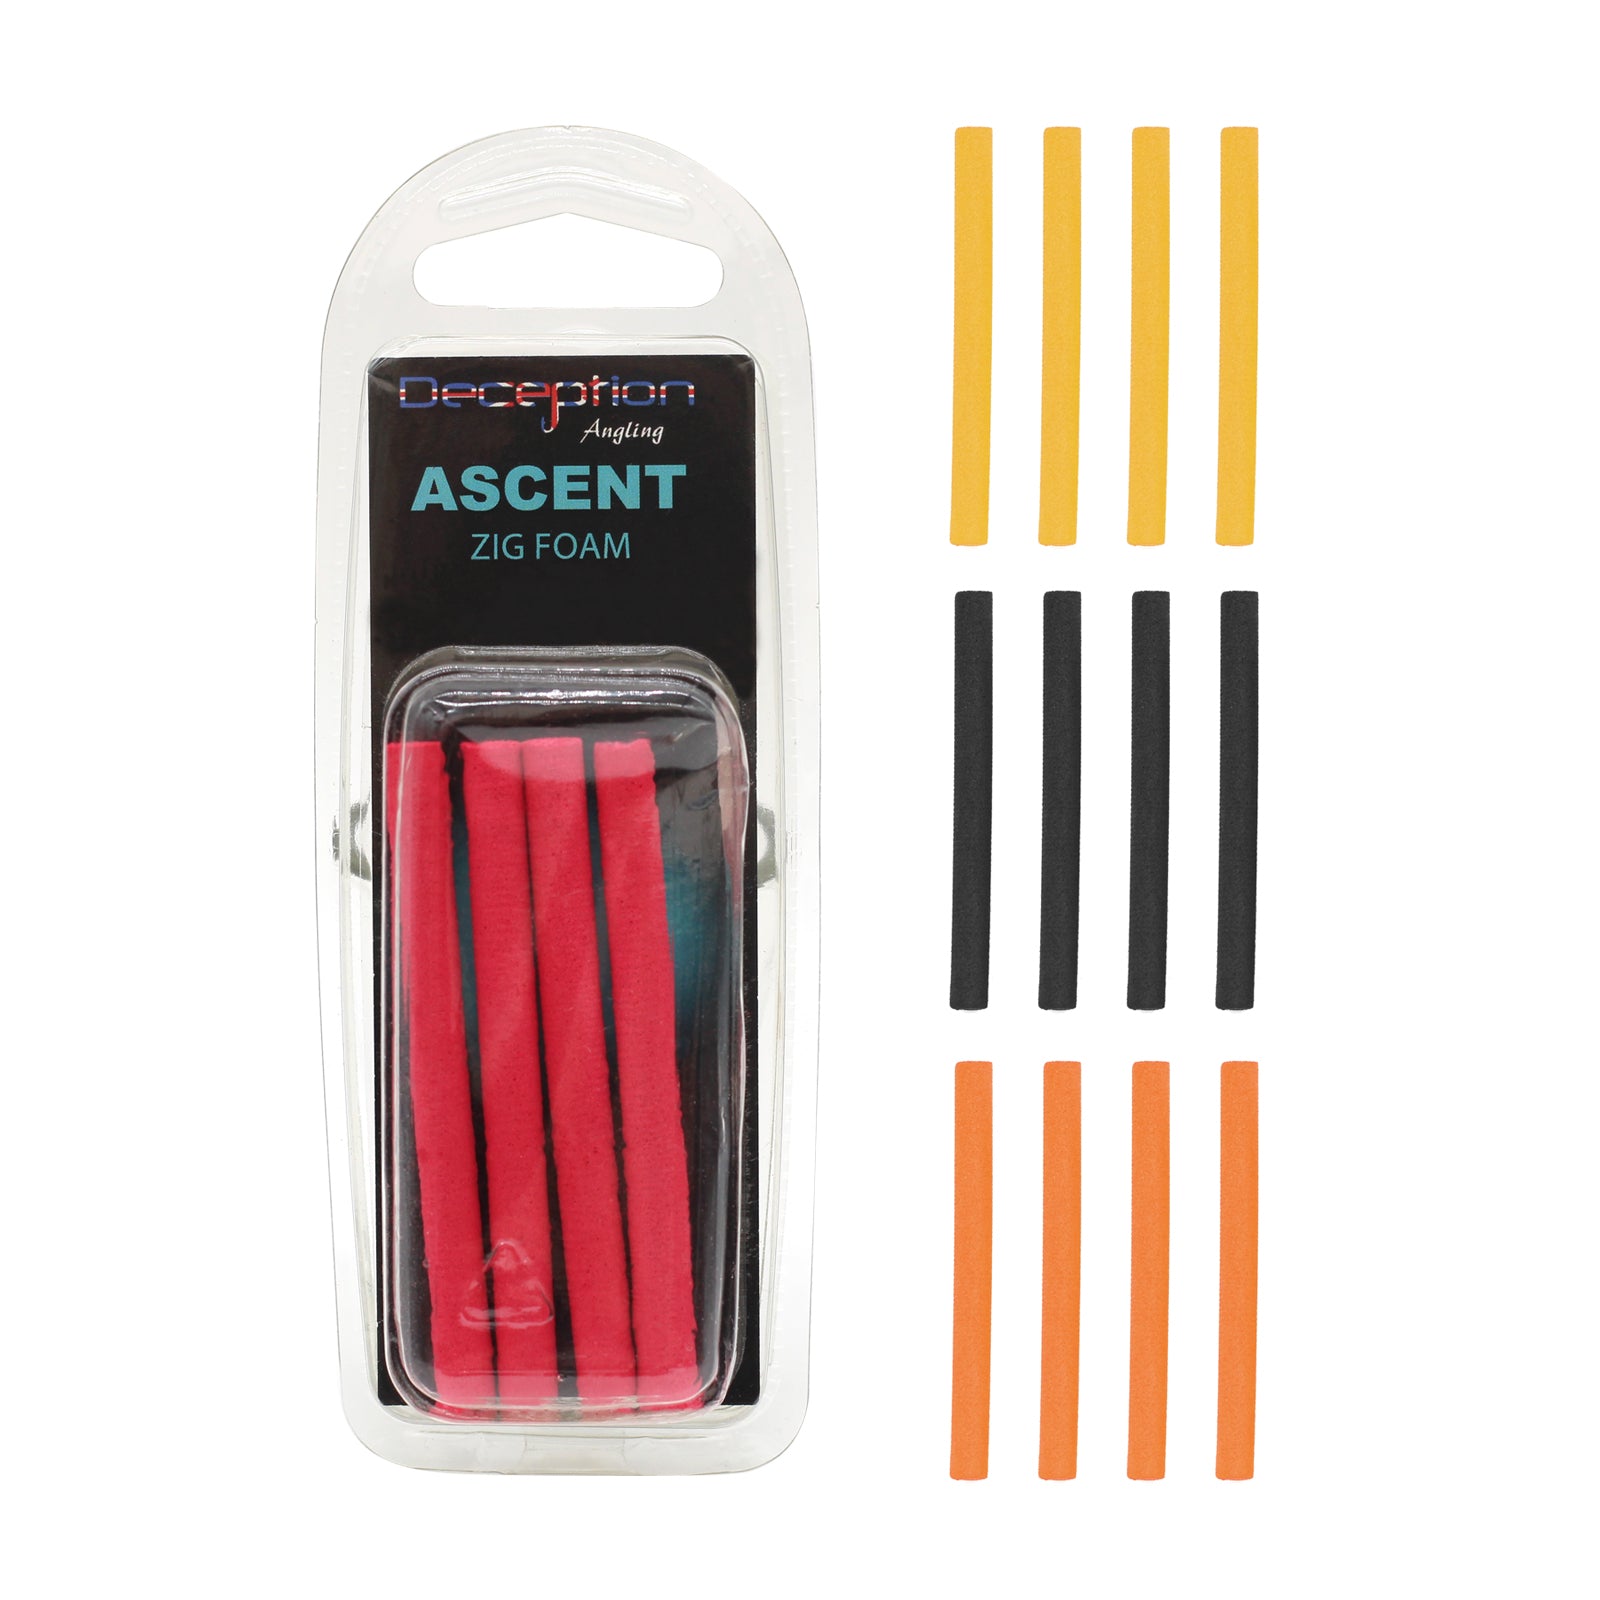 Deception Angling Ascent Zig Foam for Fishing Pack of 4 in Four Colour Options